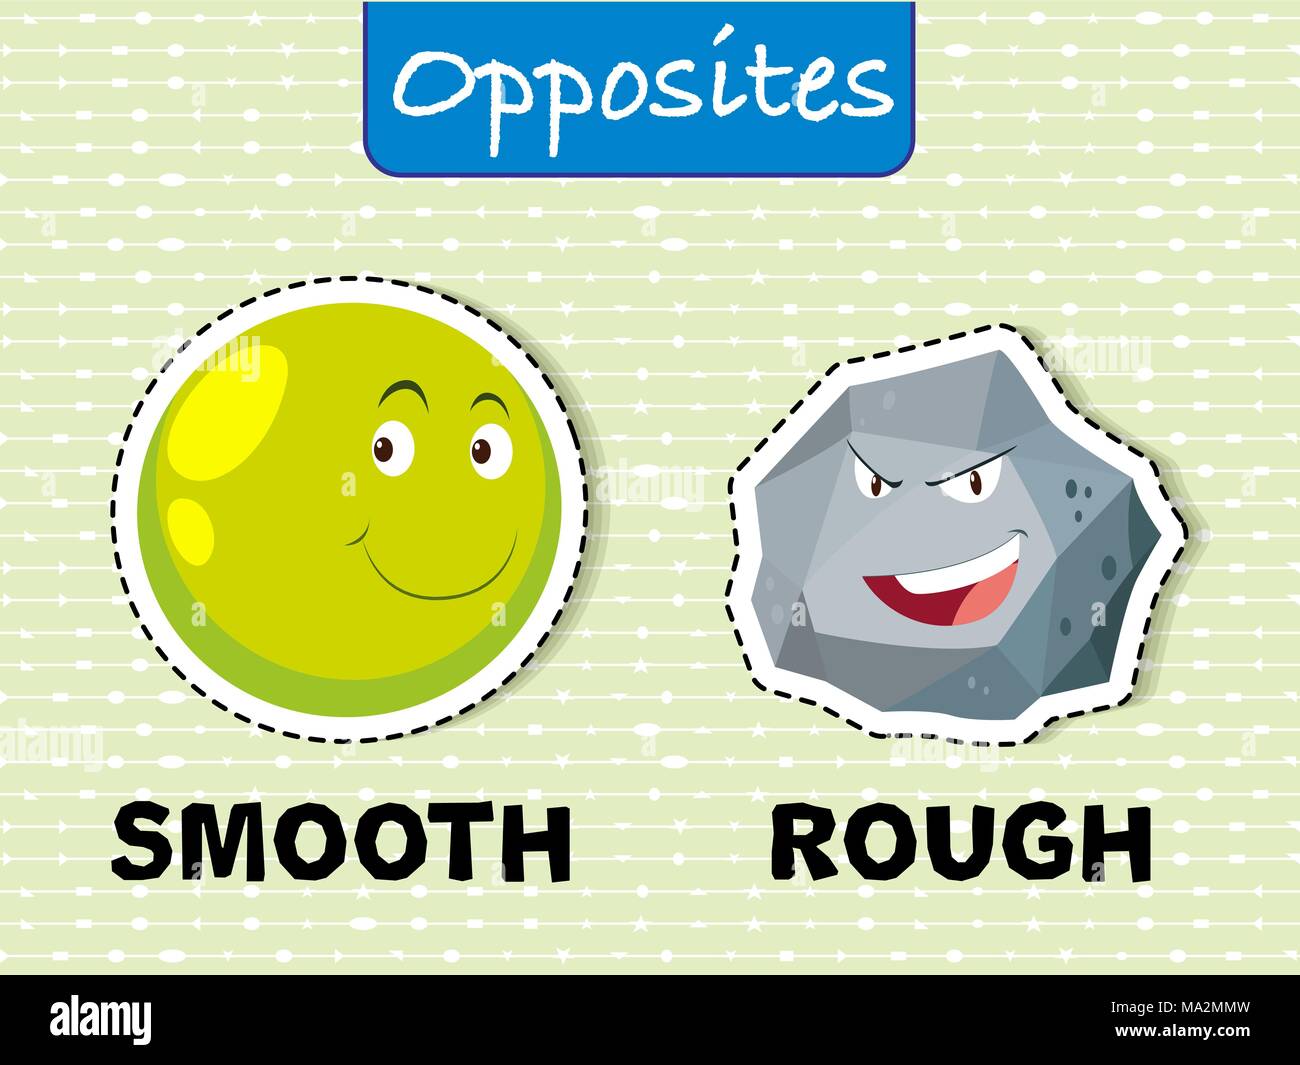 Opposite adjectives with smooth and rough Vector Image